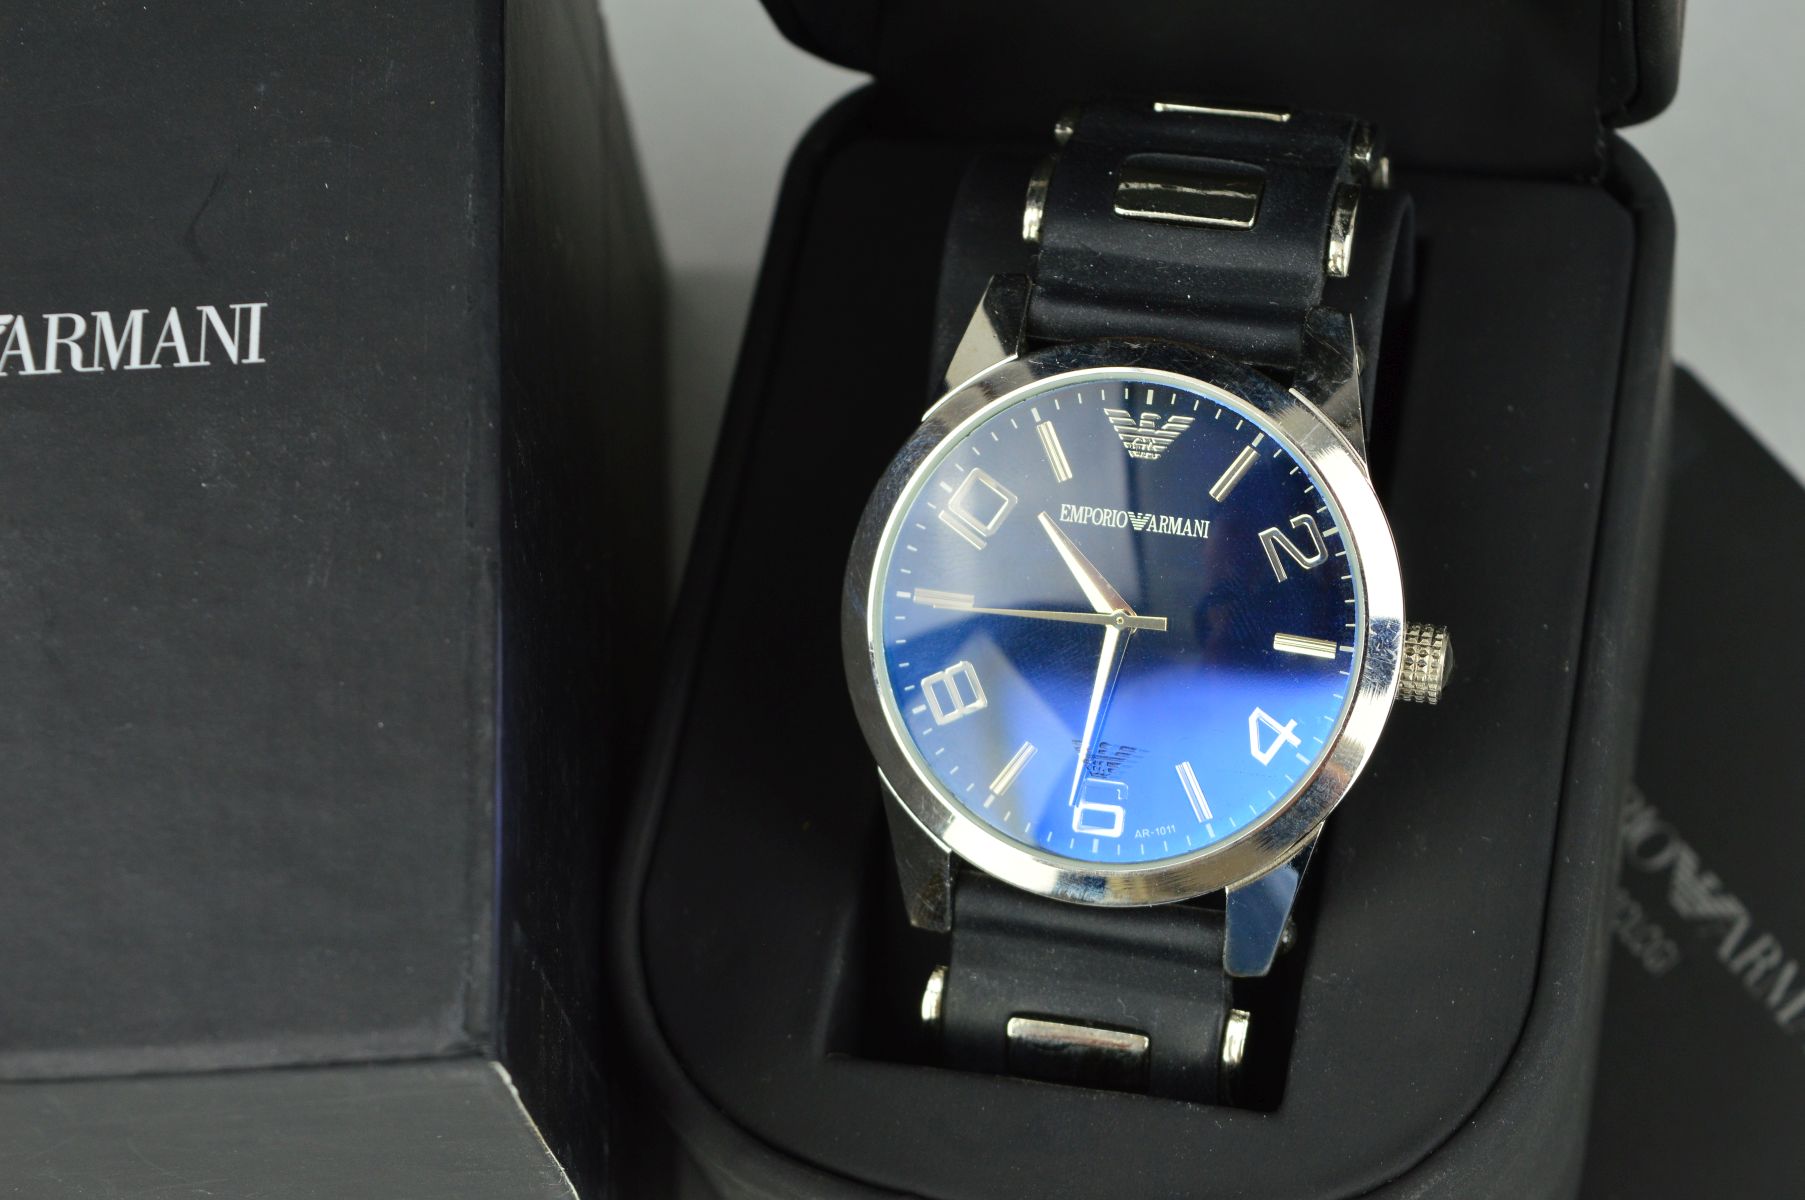 A GENTLEMAN'S EMPORIO ARMANI WRISTWATCH WITH MAKER'S CASE, the circular blue face with Arabic